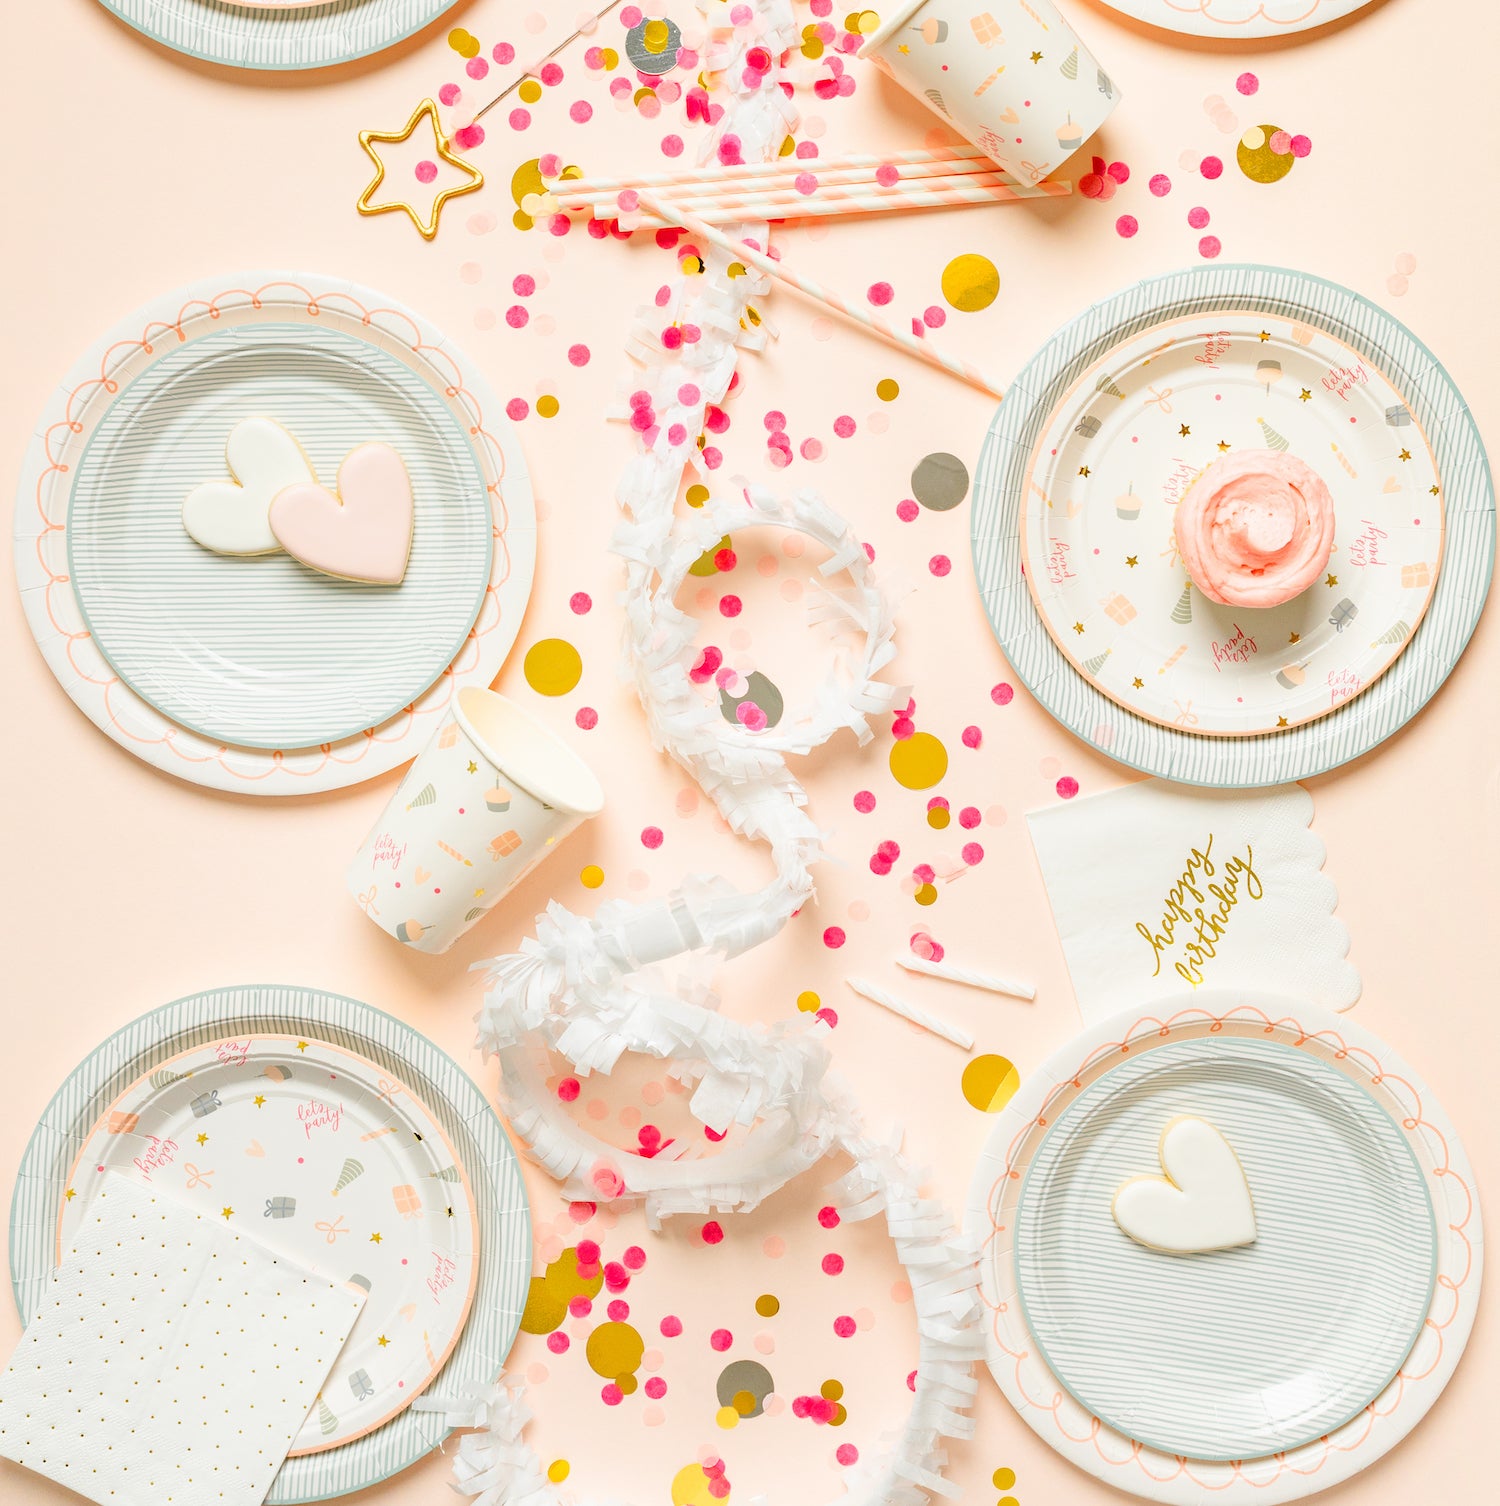 Birthday party tablescape with pink blue gold and white pattern designs